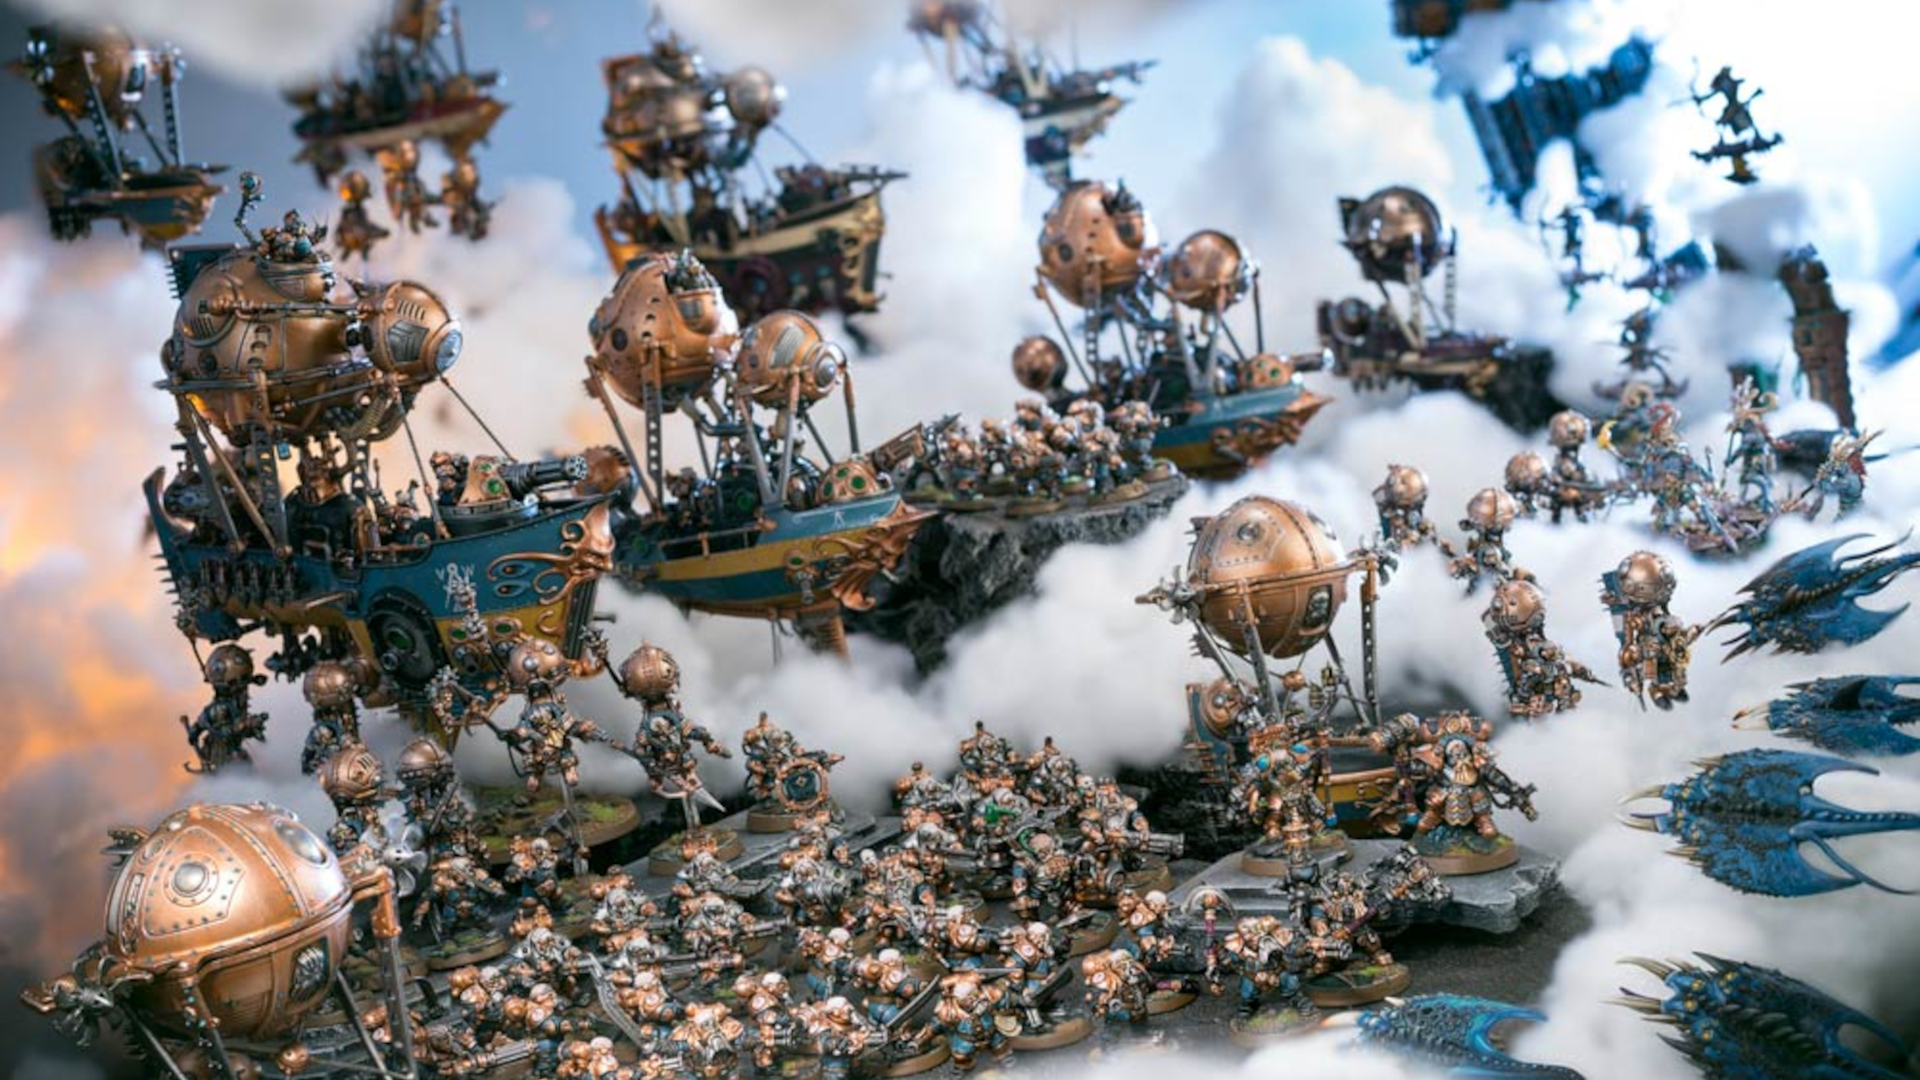 Warhammer Age of Sigmar Kharadron Overlords army (photo by Games Workshop)